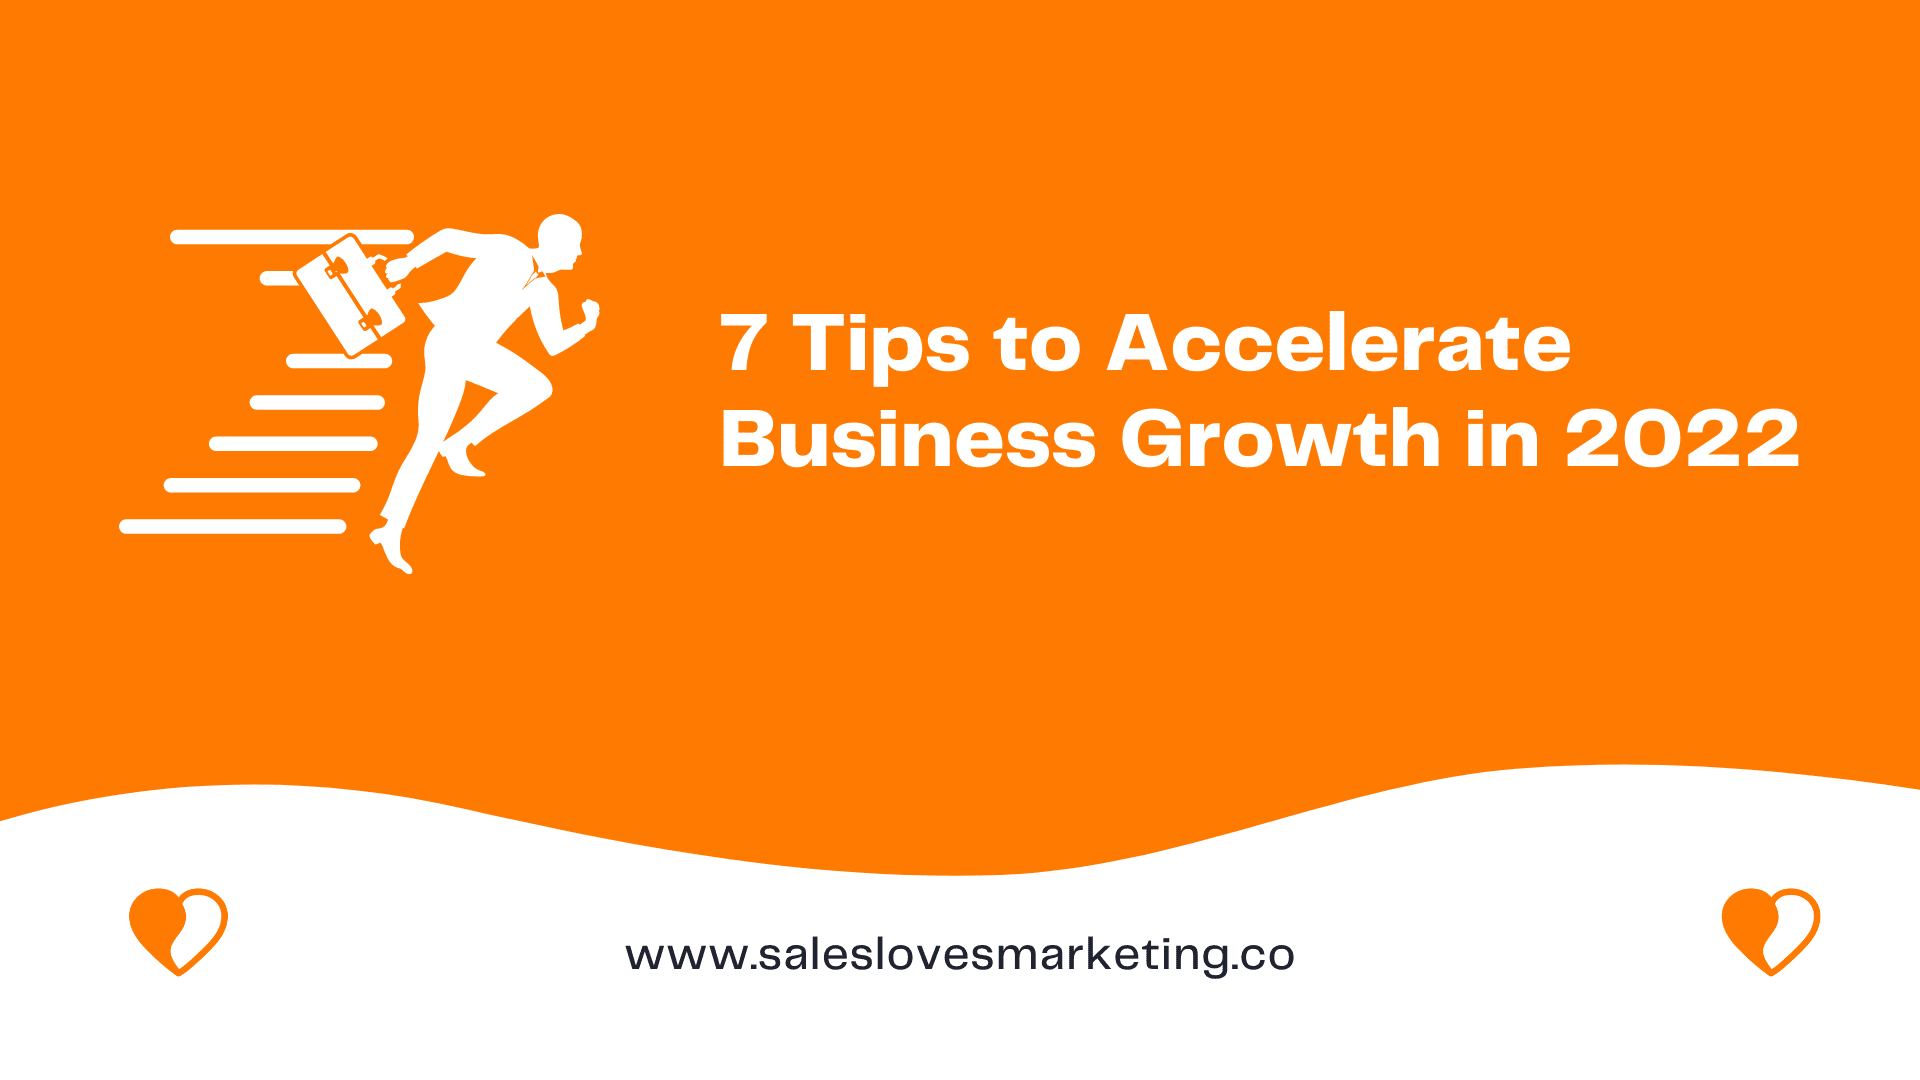 7 Tips to Accelerate Business Growth in 2022